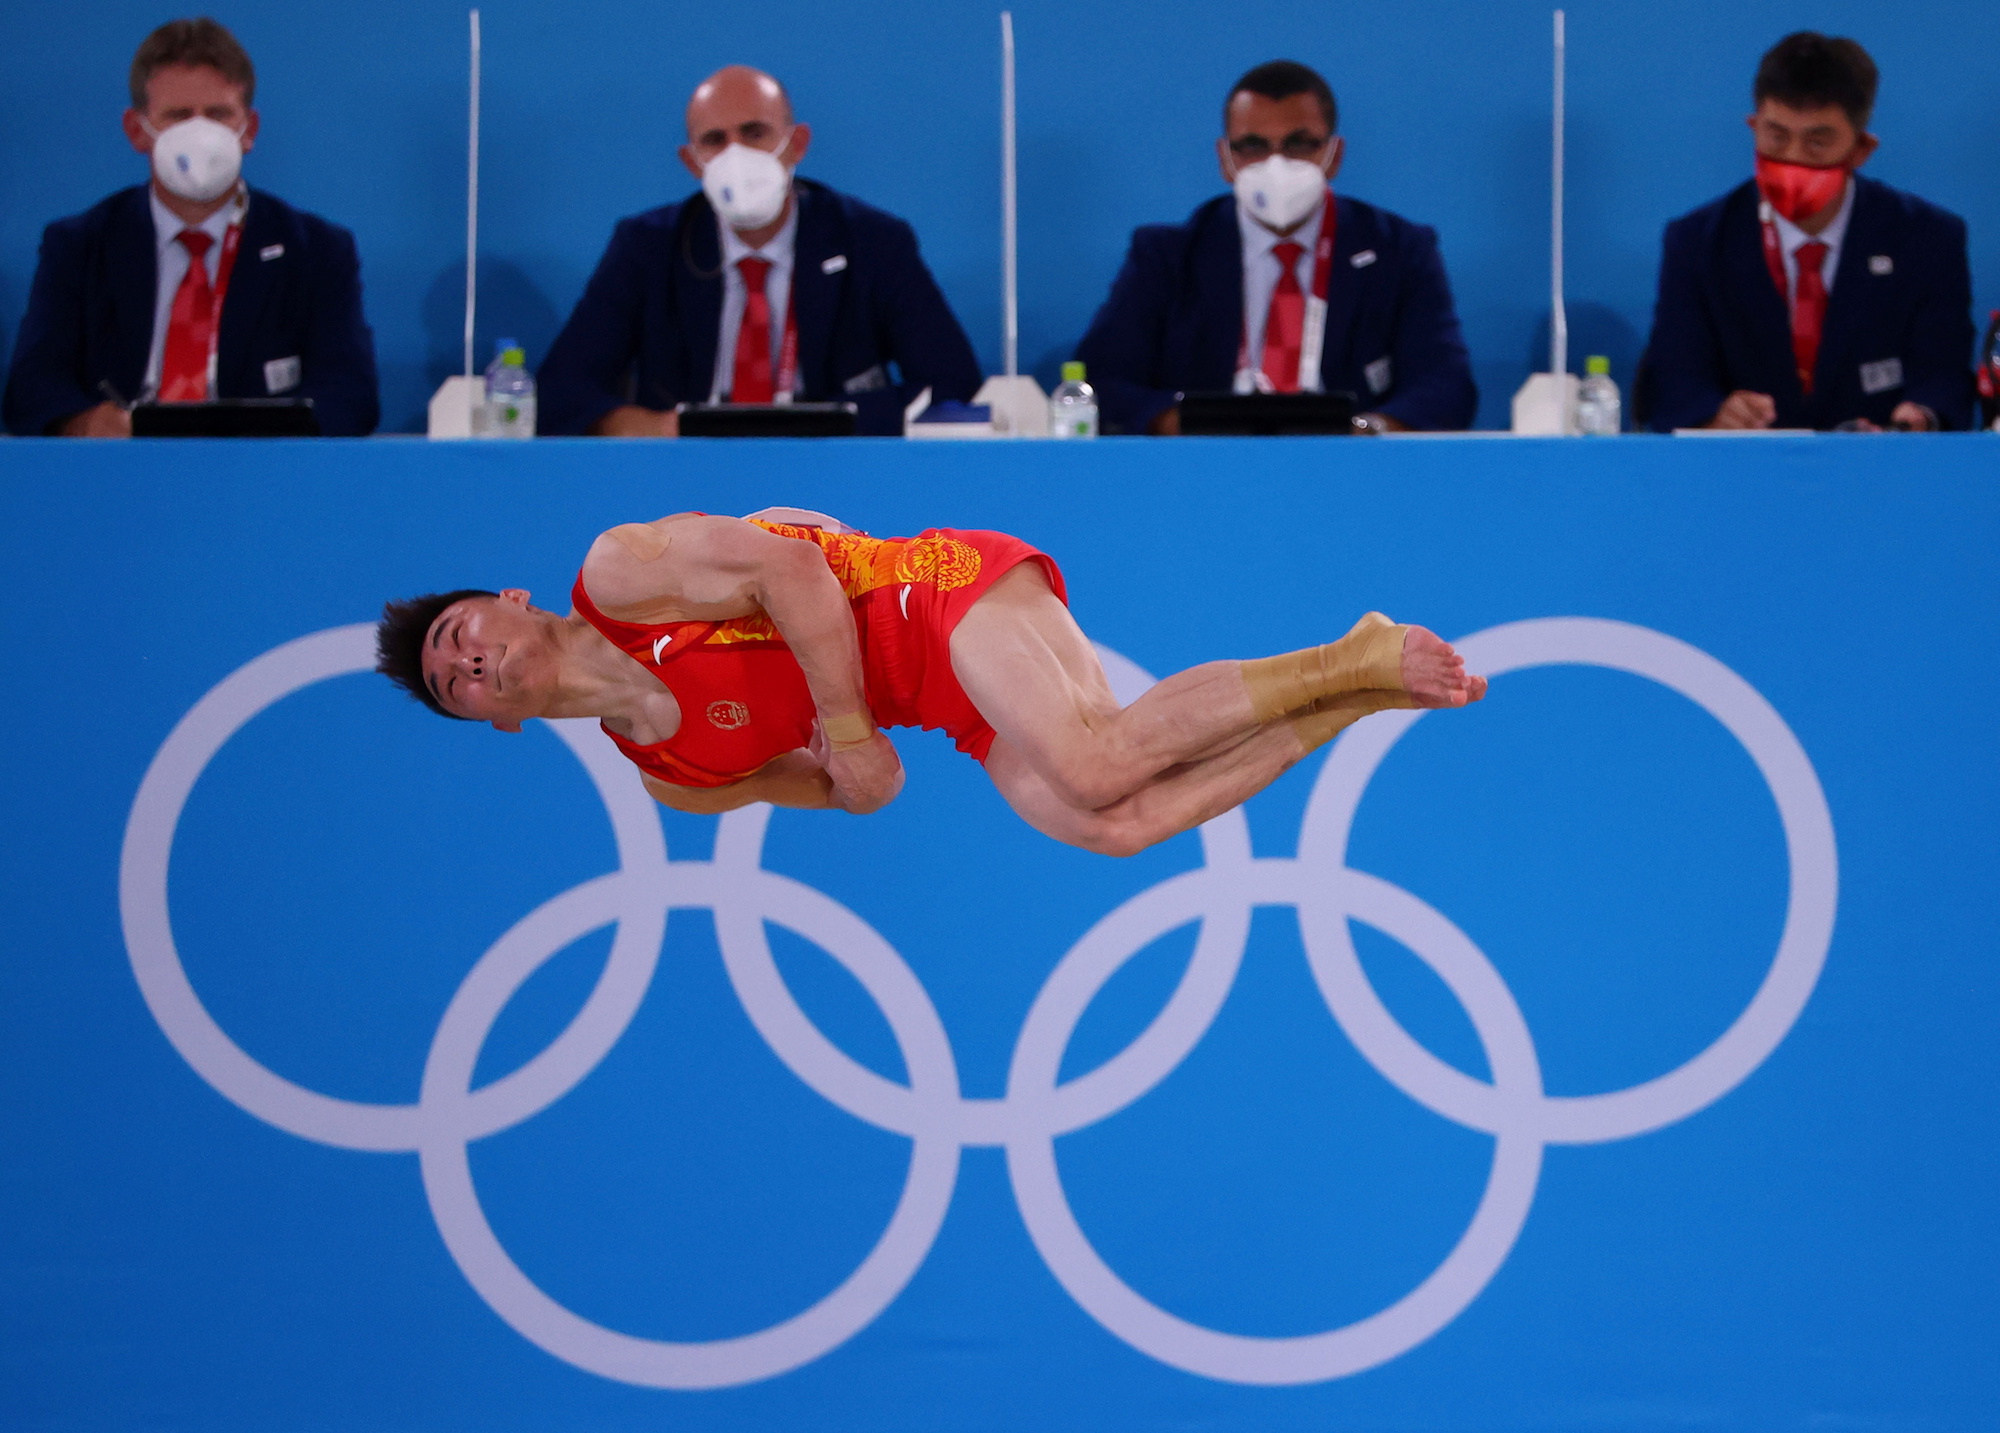 Sun Wei of China in action during the floor exercise. | REUTERS